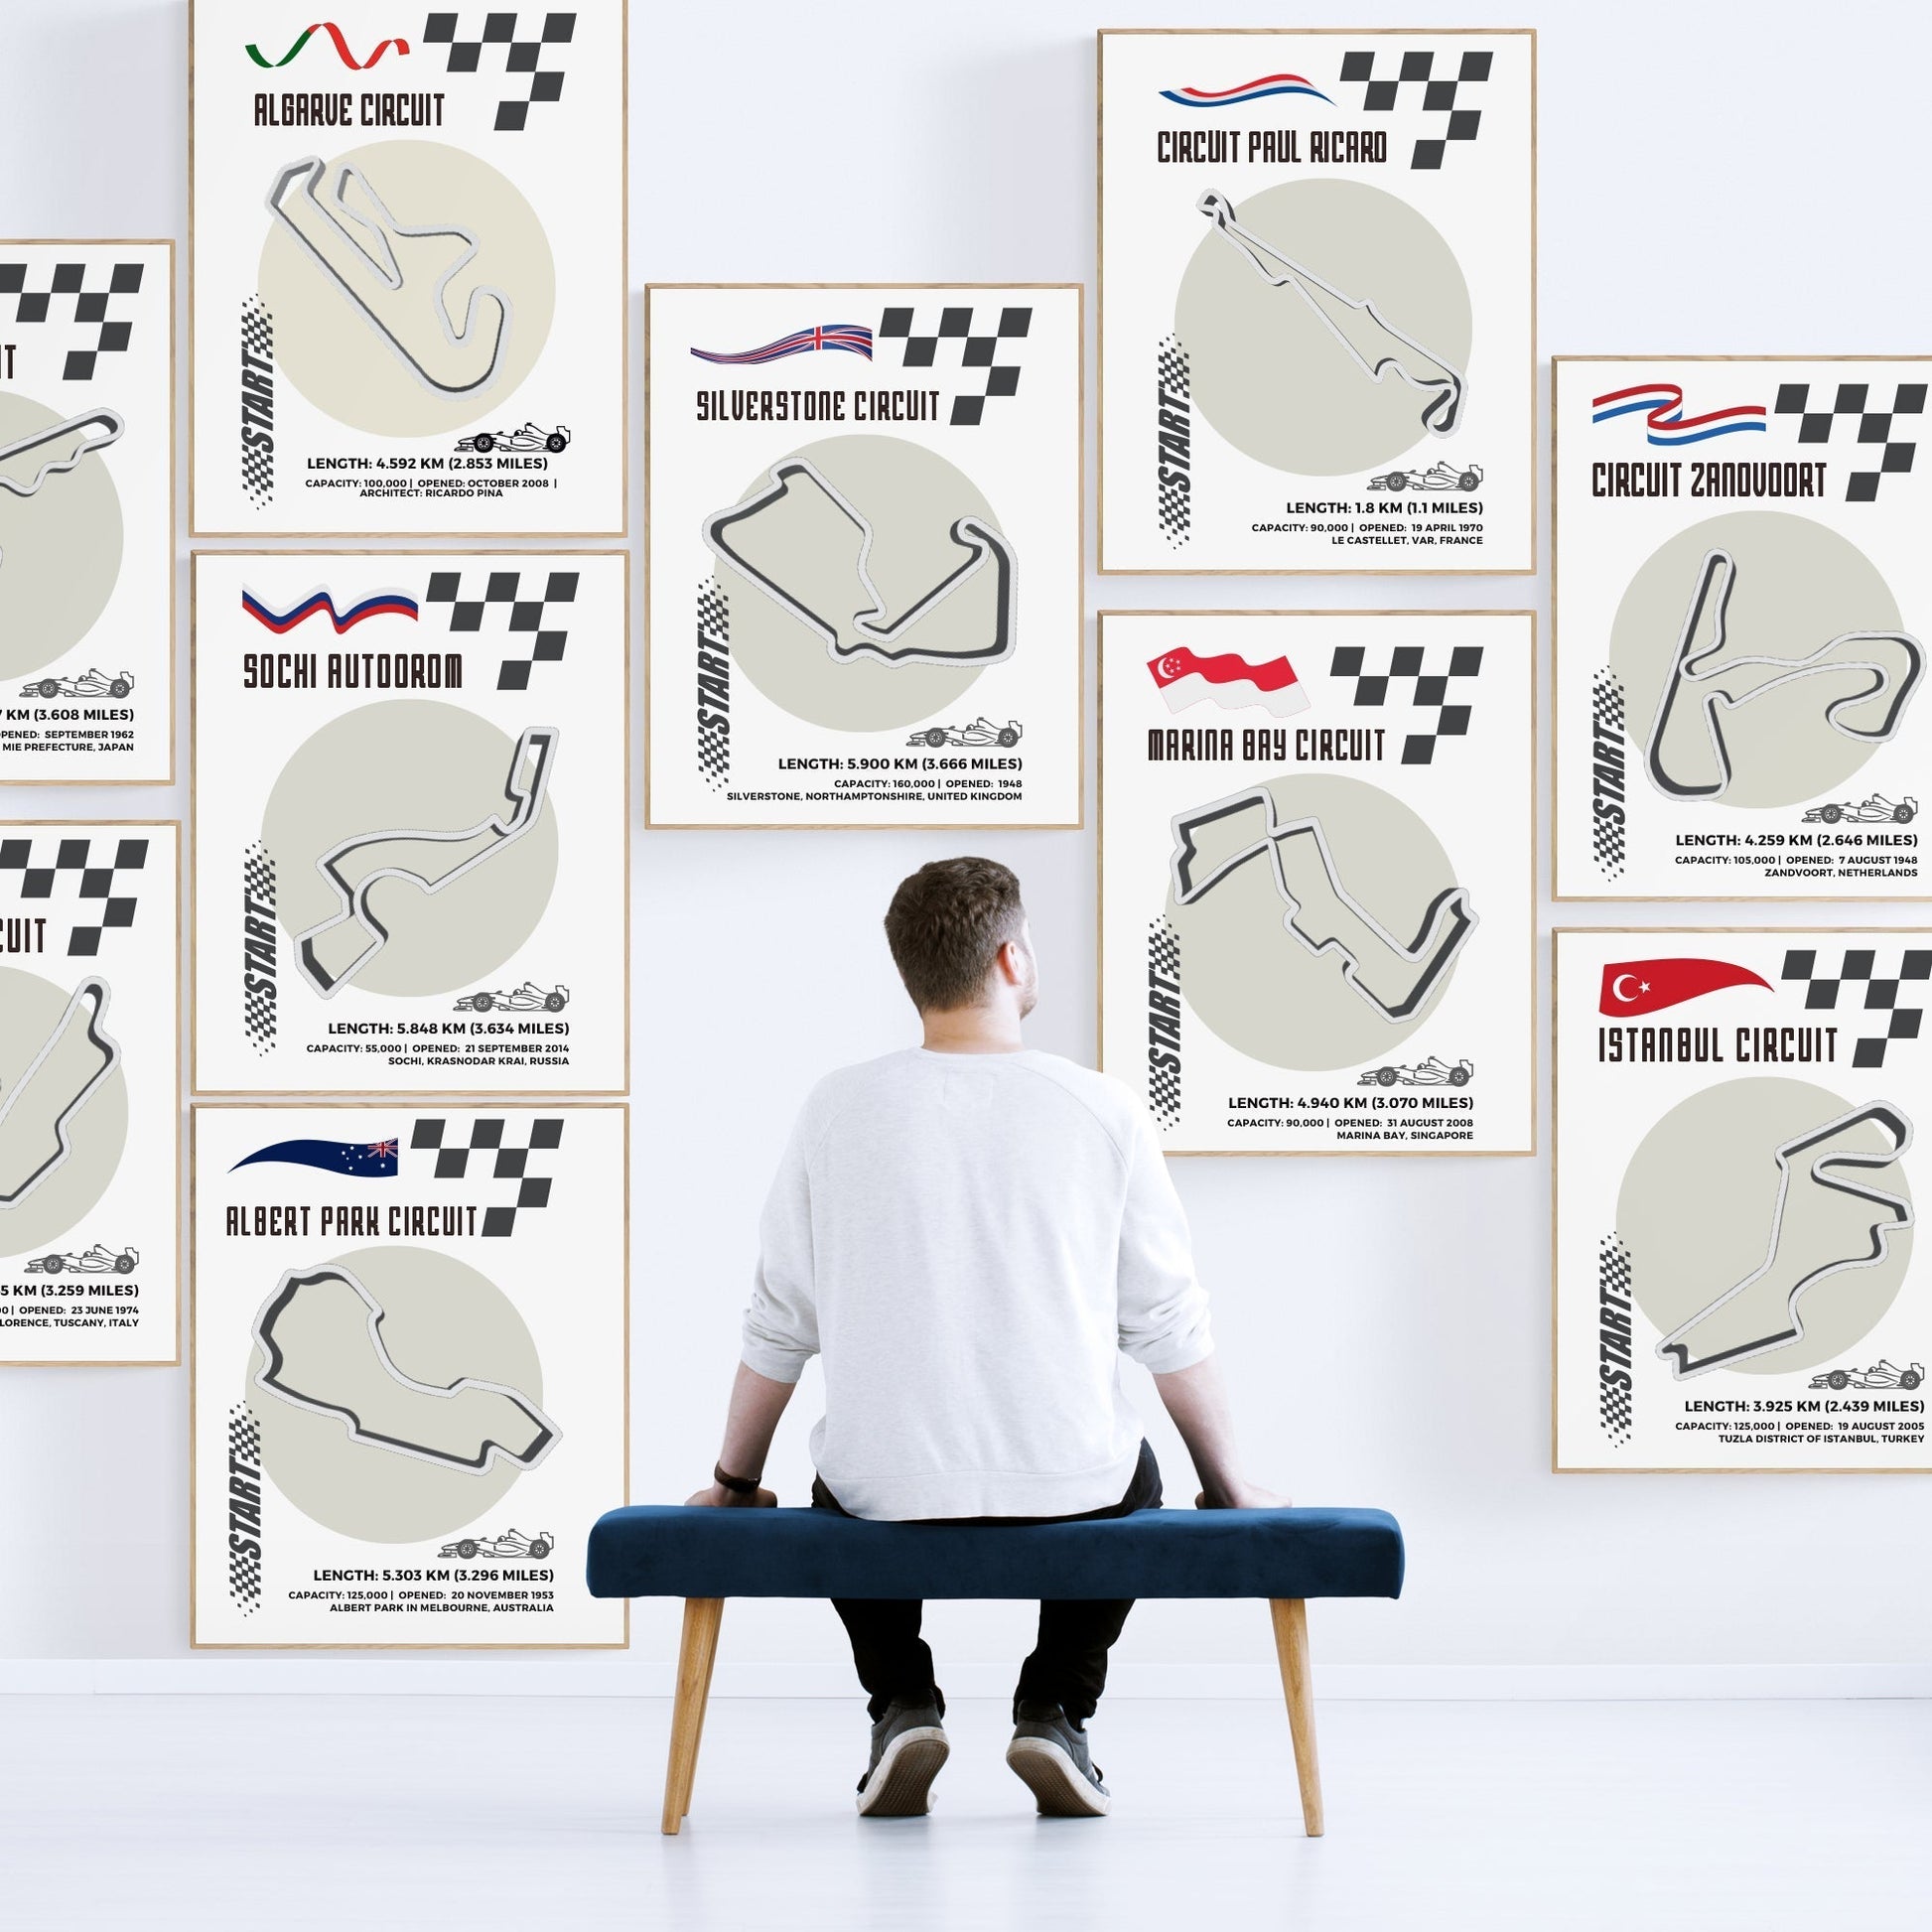 Experience the thrill of Formula One with Circuit of the Americas F1 Posters. Featuring a detailed map of the racing tracks and a circuit guide, these posters are a dream come true for fans. Made with premium, age-resistant paper and produced in the UK, each poster showcases historical information and notable moments from the circuit. Get your complete look with the "Formula One Poster" for the ultimate fan experience.